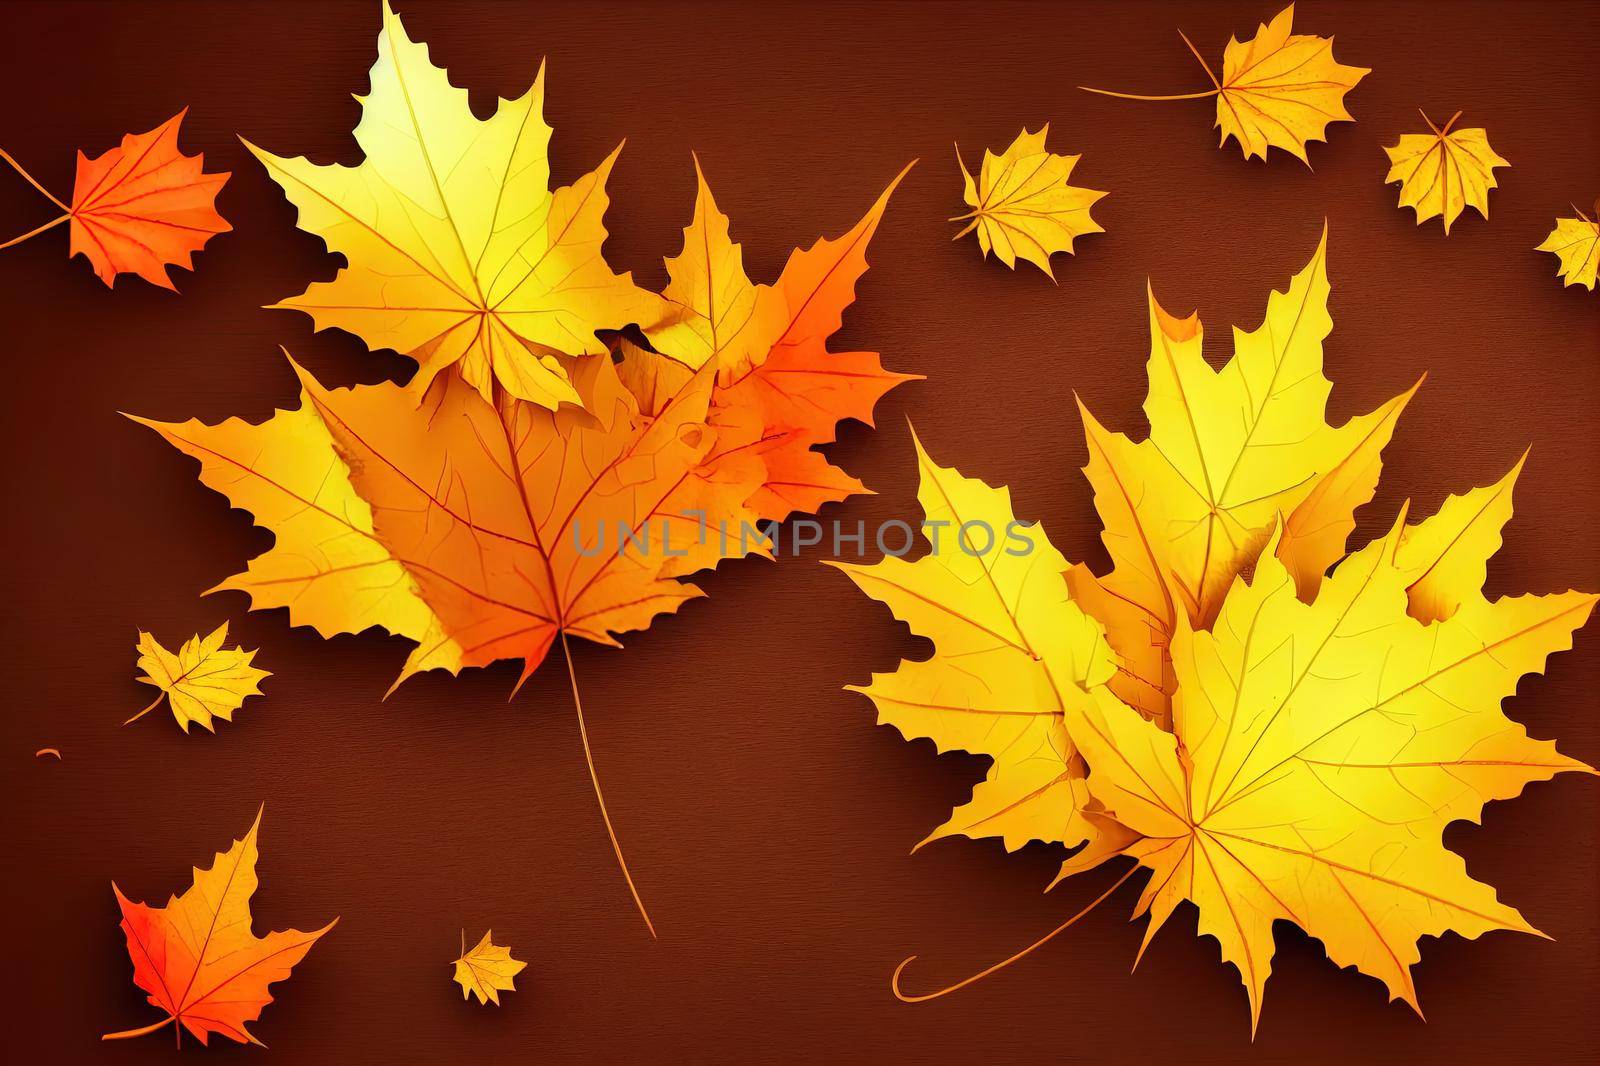 Autumn sale background with maple leaves display podium gift box percent symbol acorn copy space text 3D rendering illustration